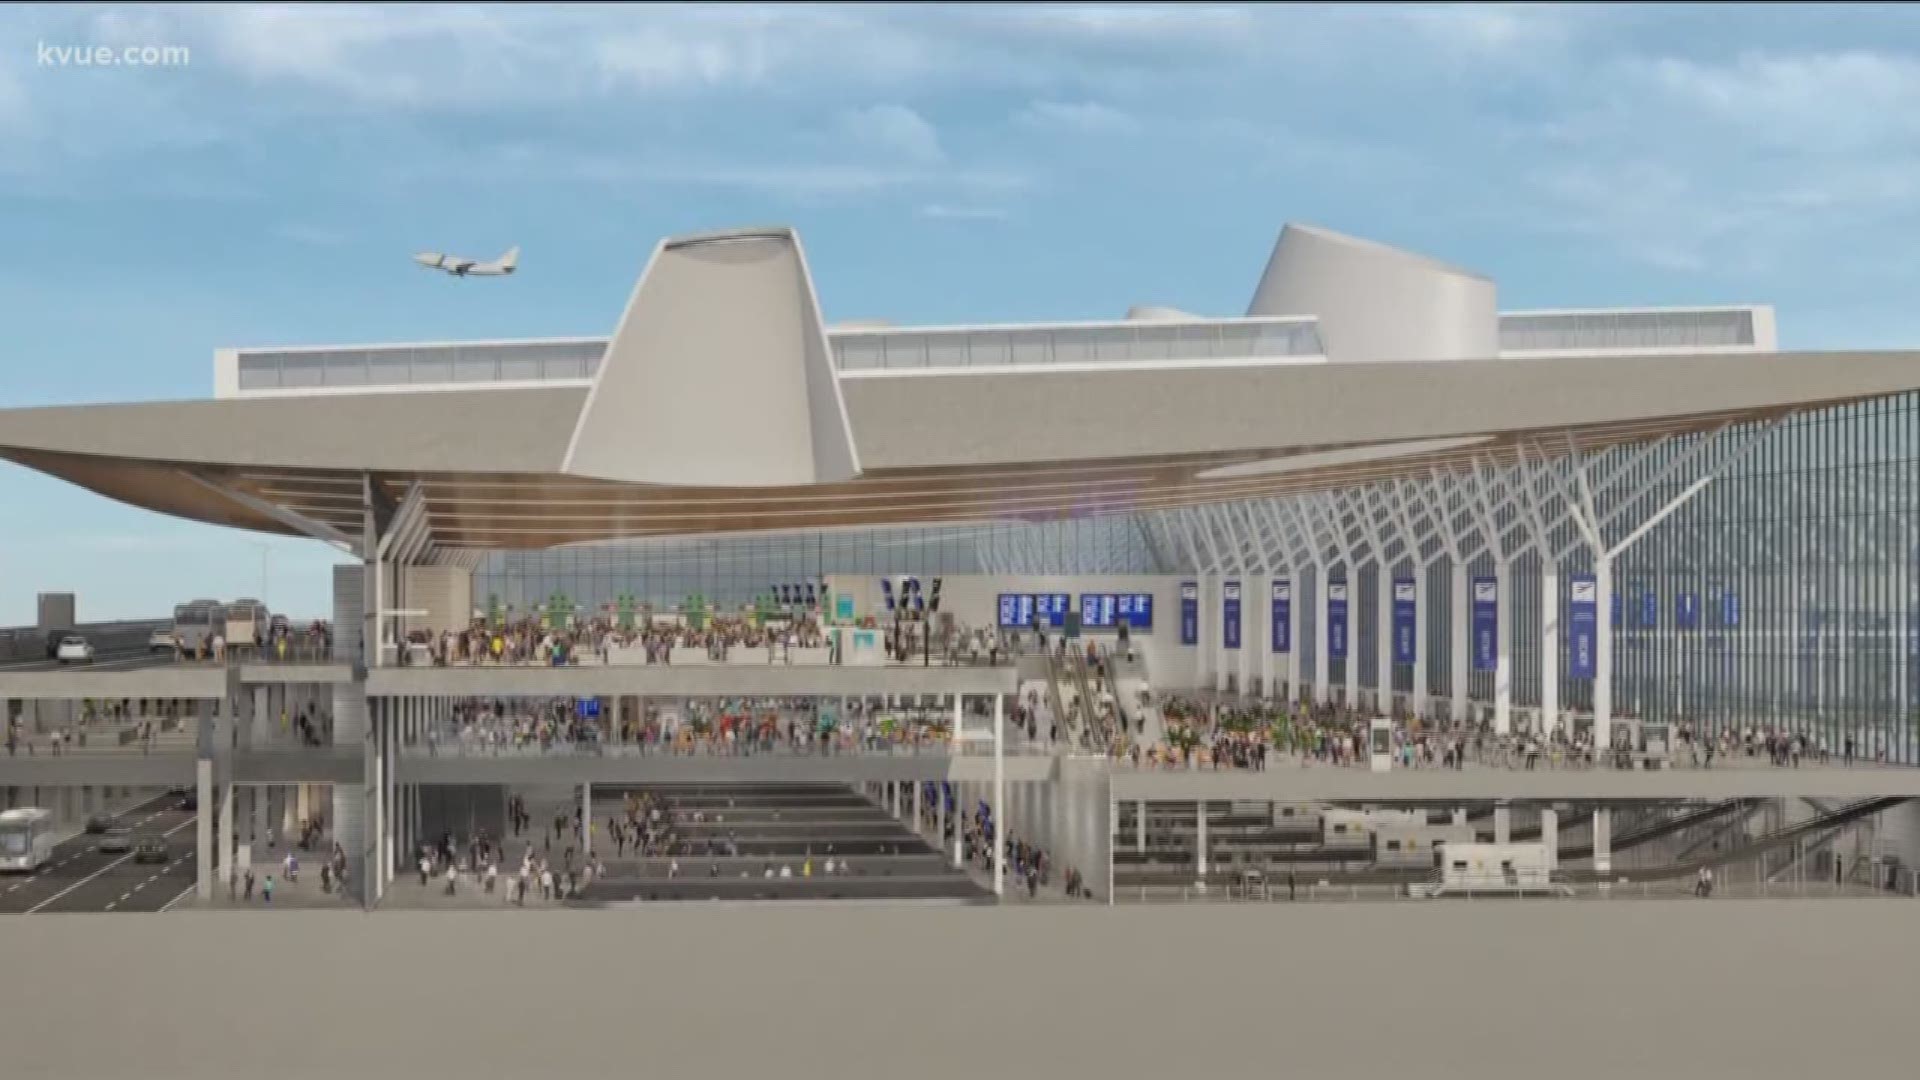 In the next 20 years, the Austin-Bergstrom International Airport is expected to look a lot different. Imagine the Austin airport with double the amount of parking spaces, gates and even another baggage claim.